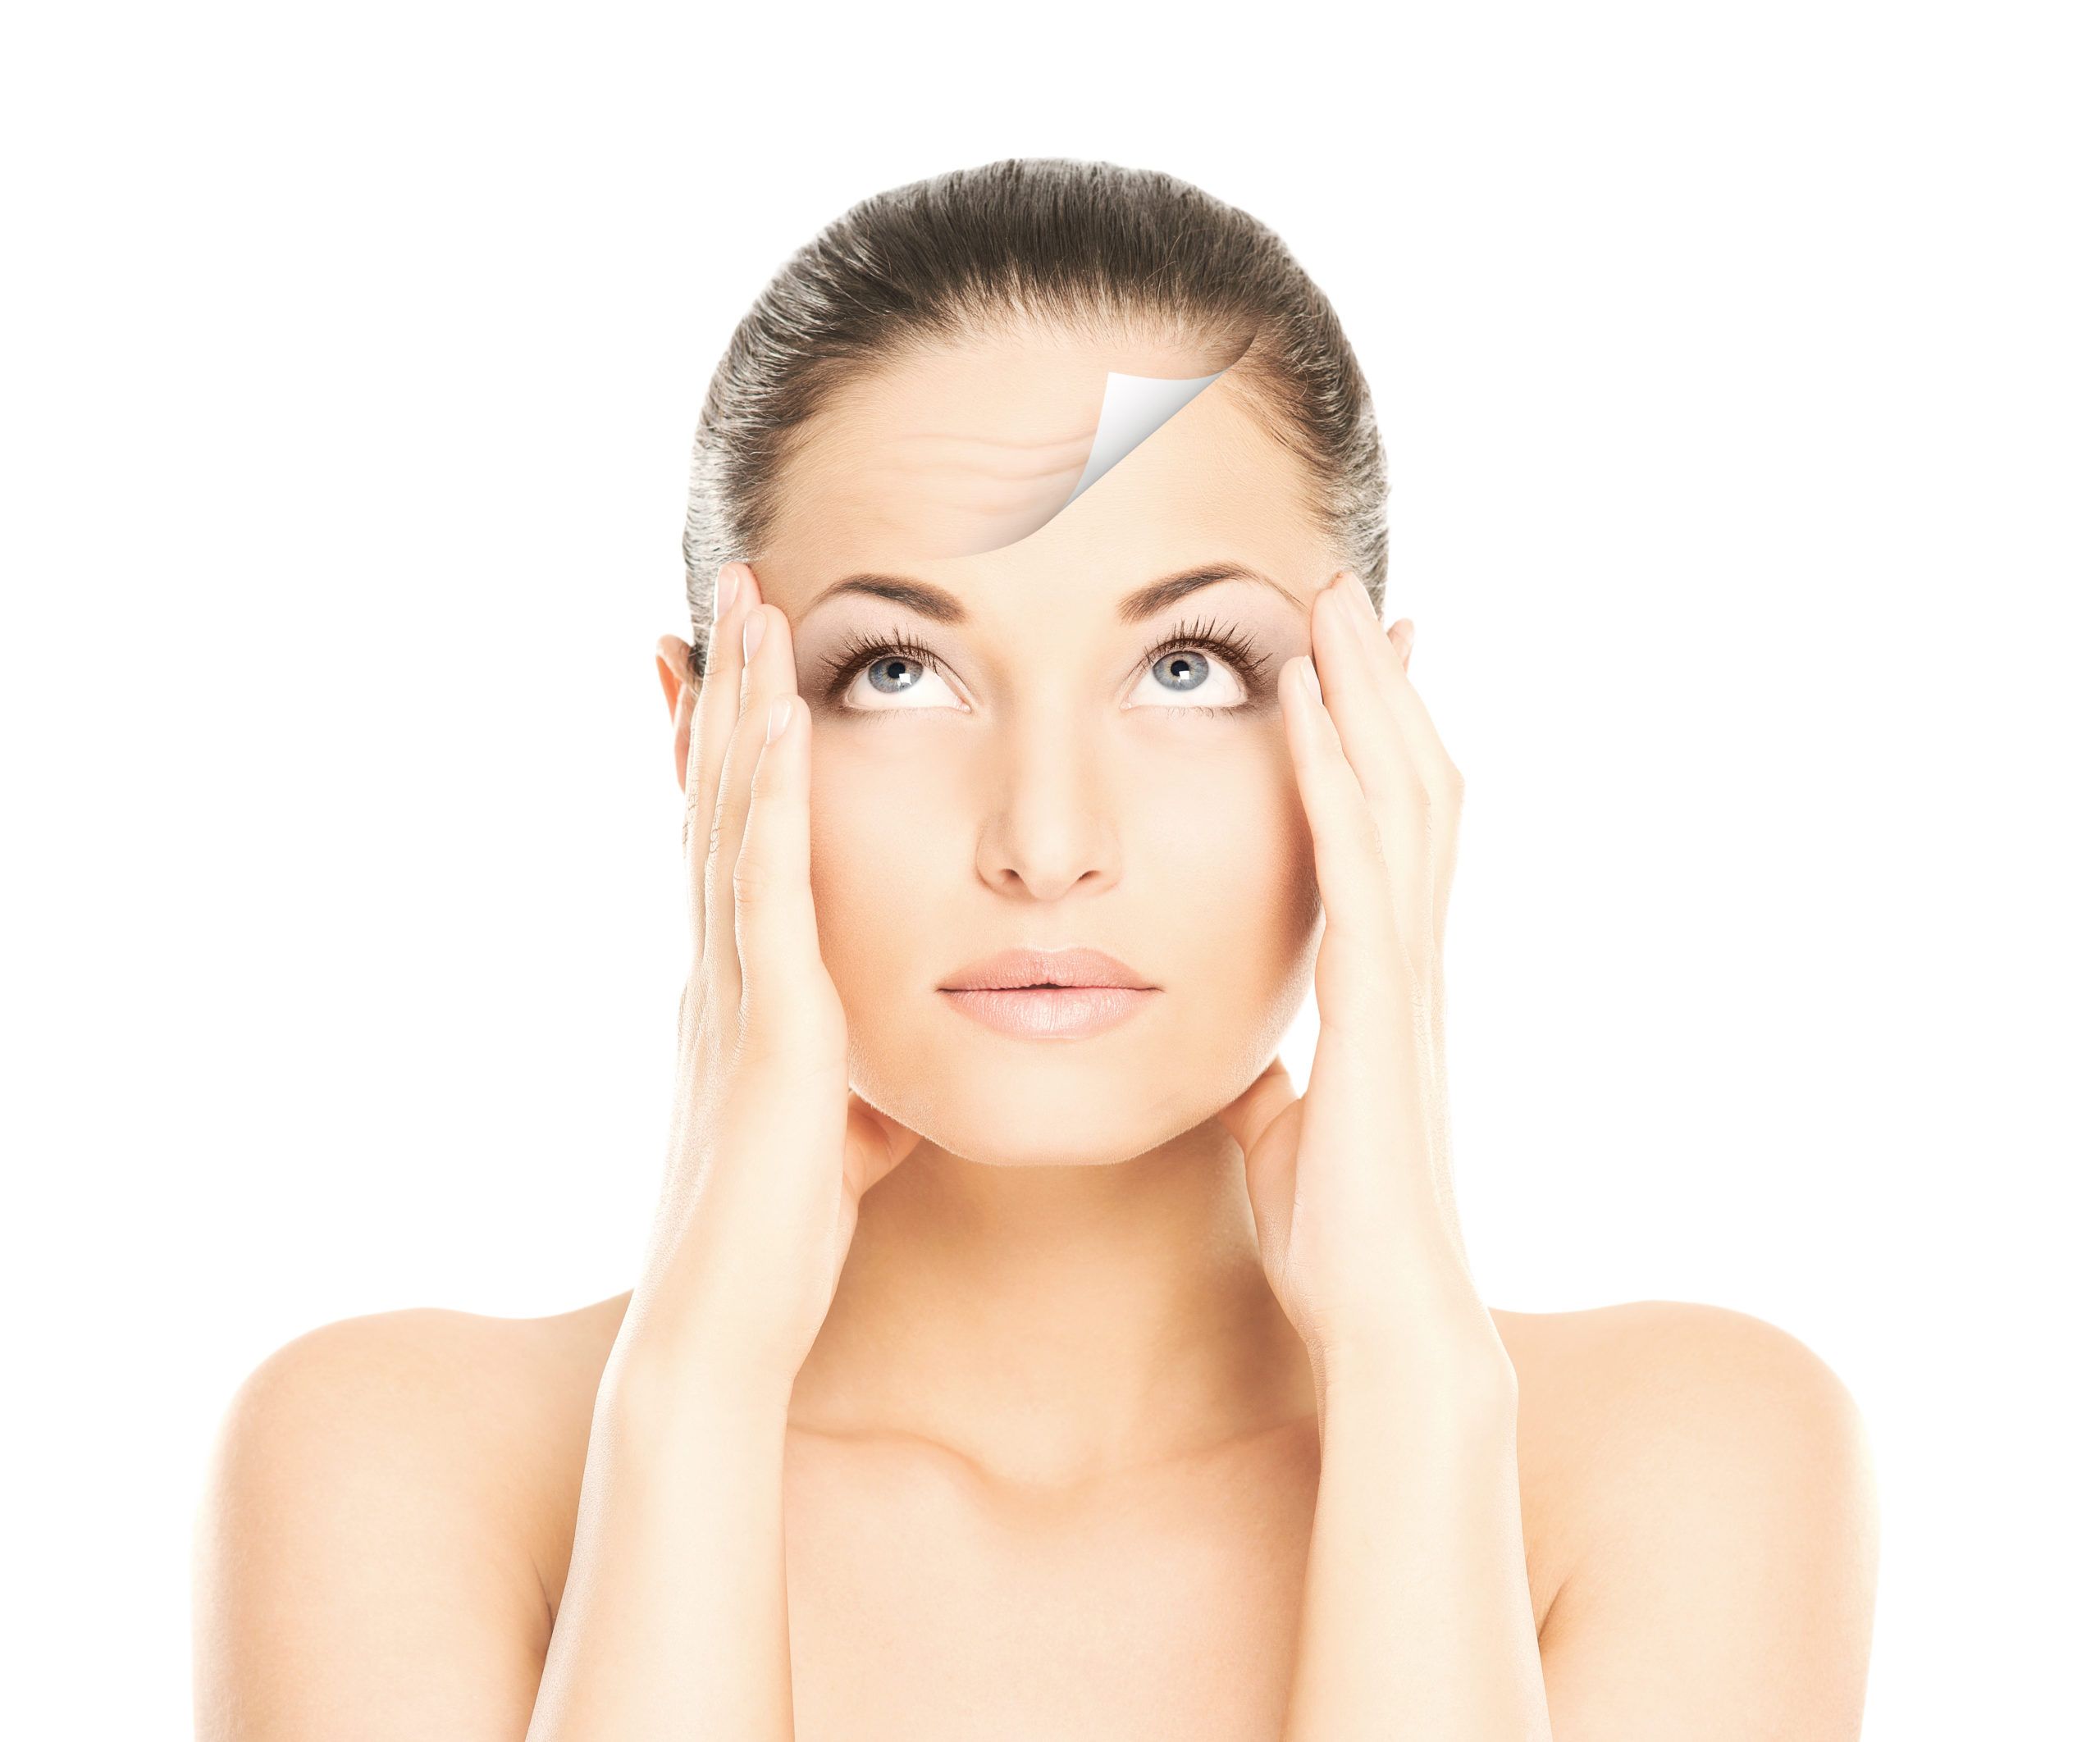 Botox® injections erase forehead wrinkles